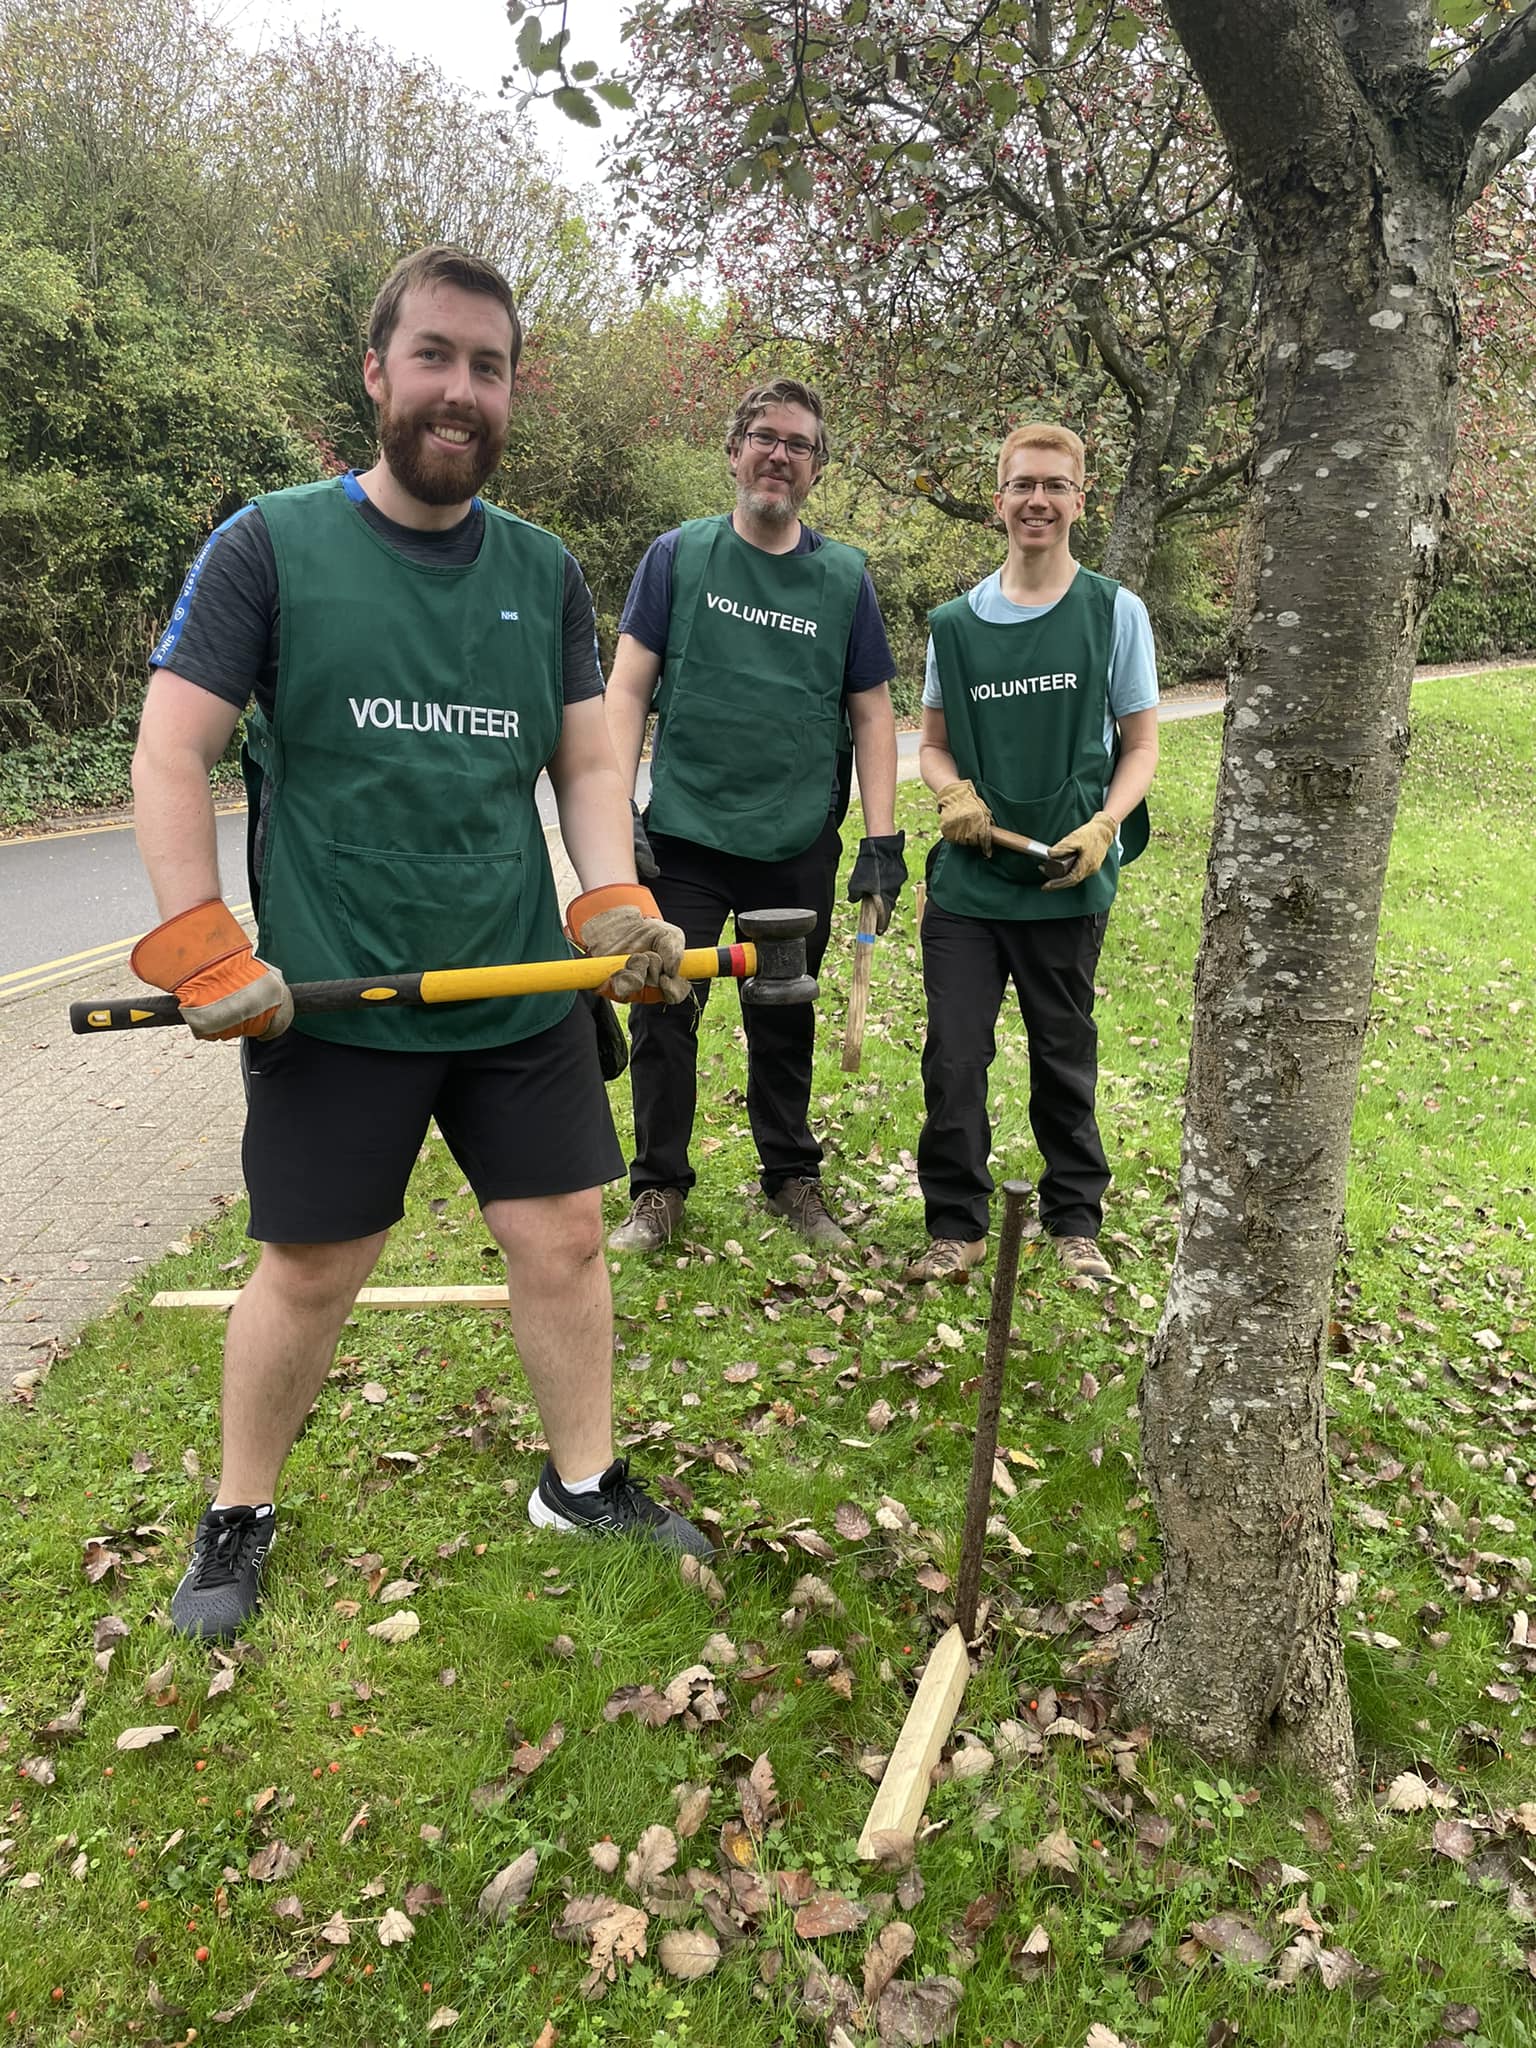 Three volunteers in green tabards, one holds a mallet and is standing next to a metal stake which has been driven into the ground.